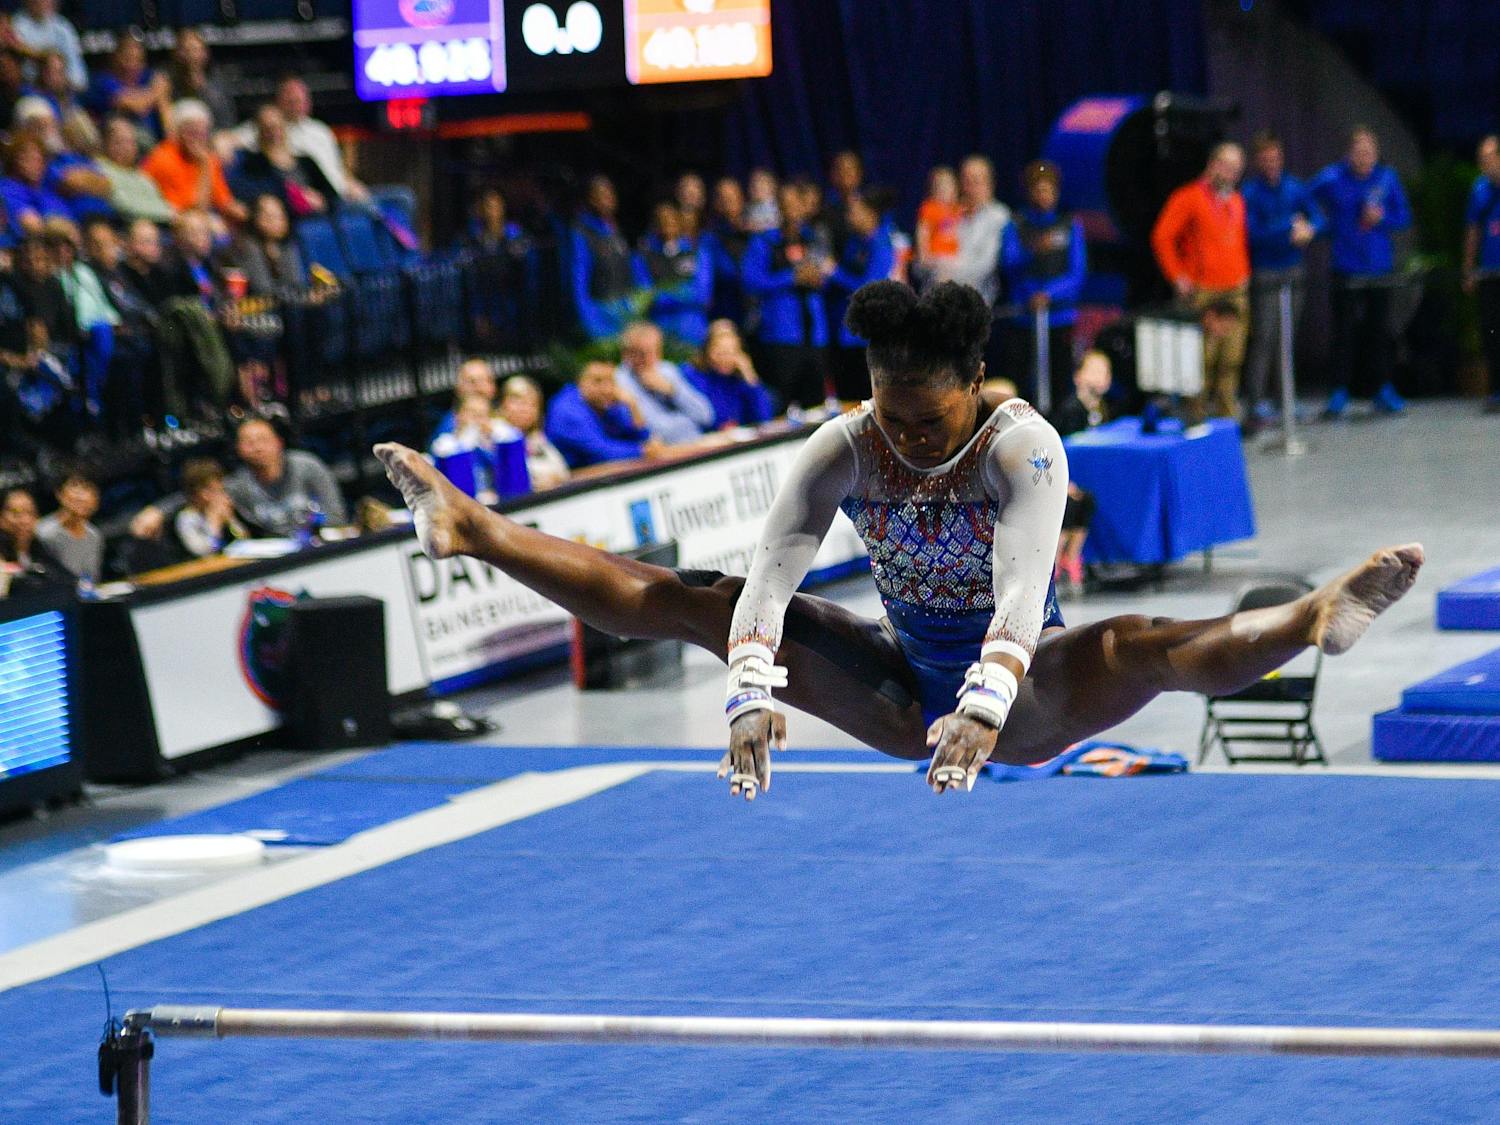 Senior Alicia Boren scored a 9.950 on the uneven bars and a 9.925 on her floor routine in the No. 3 Gator's win over Kentucky on Friday.